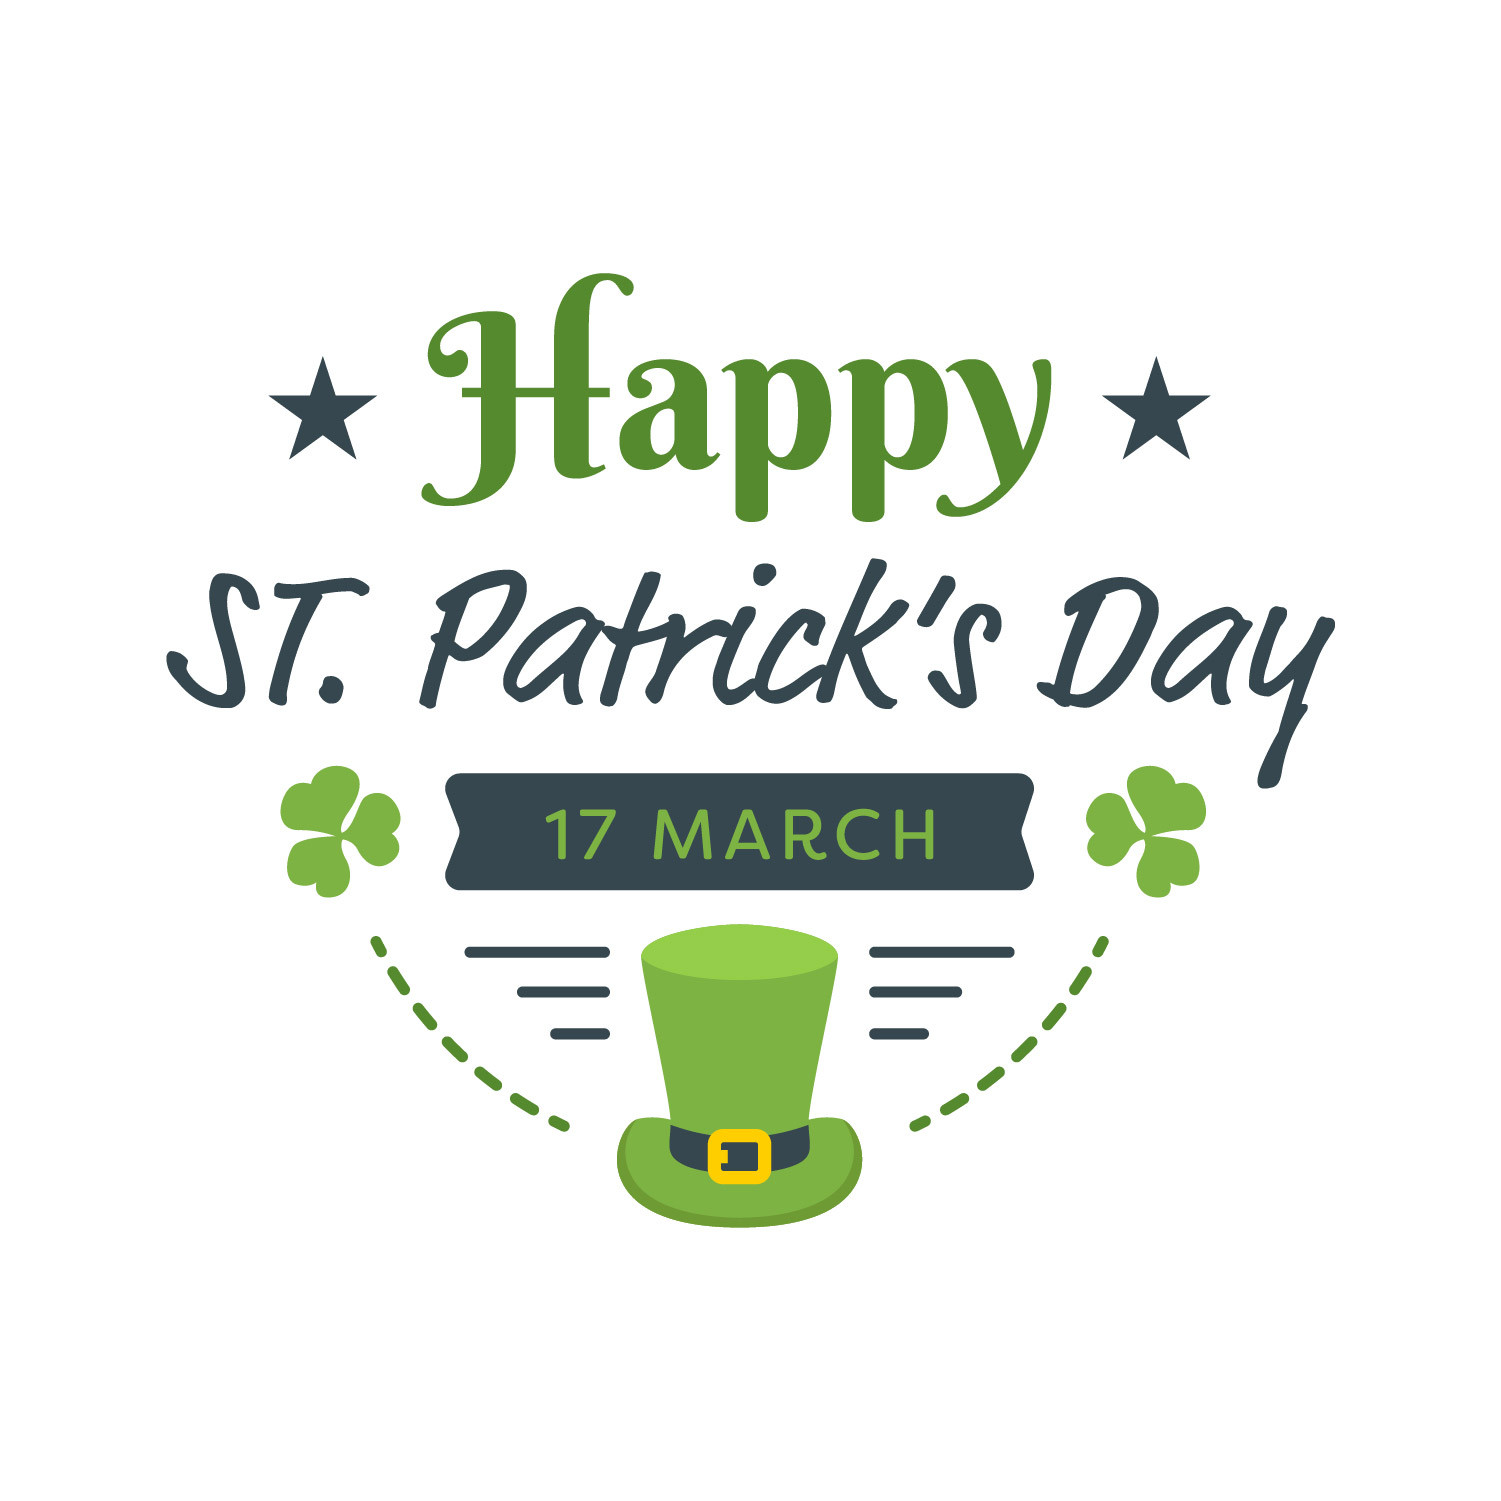 Happy St Patrick's Day Quotes
 Happy St Patrick s Day Poster Download Free Vectors